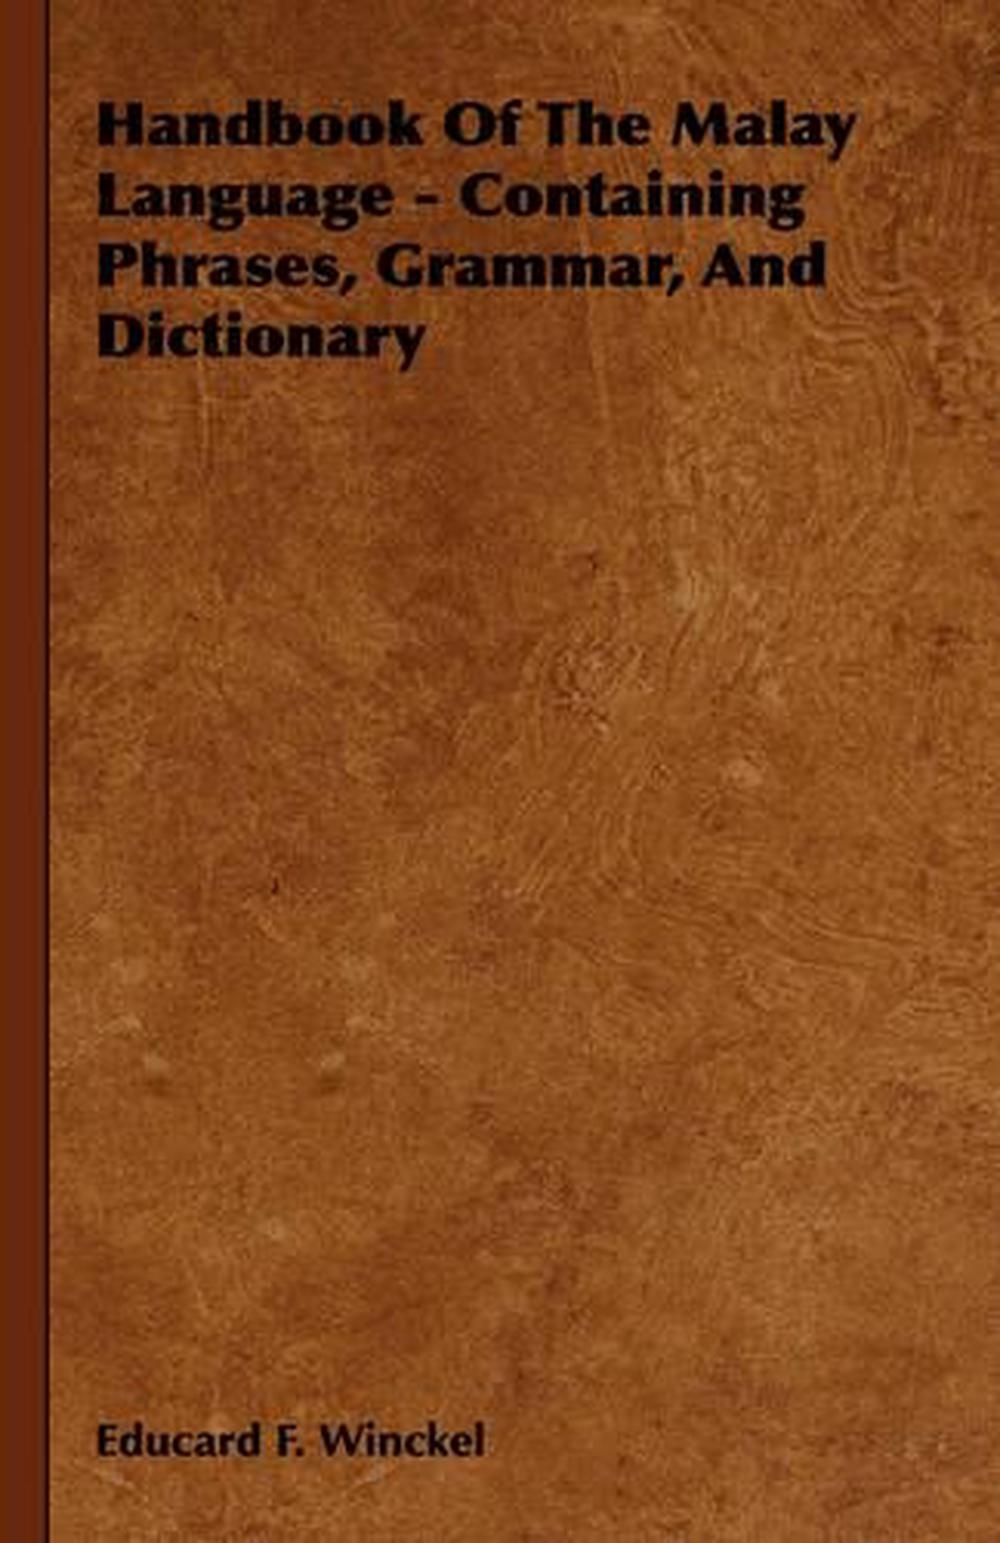 handbook-of-the-malay-language-containing-phrases-grammar-and-dictionary-by-9781443730686-ebay